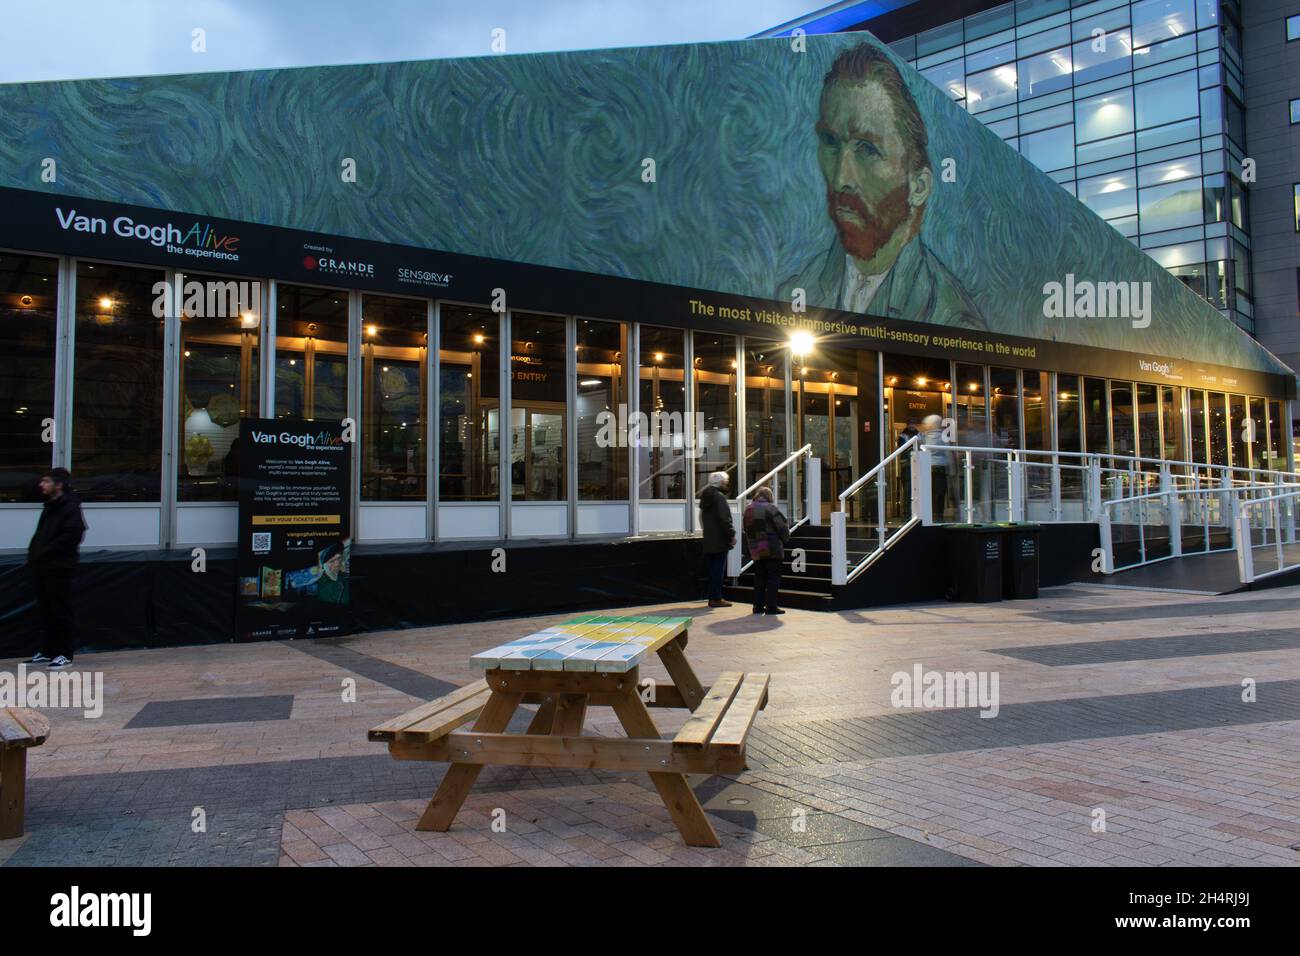 Exposition Van Gogh Alive.Media City, Salford Quays, Manchester, Royaume-Uni Banque D'Images